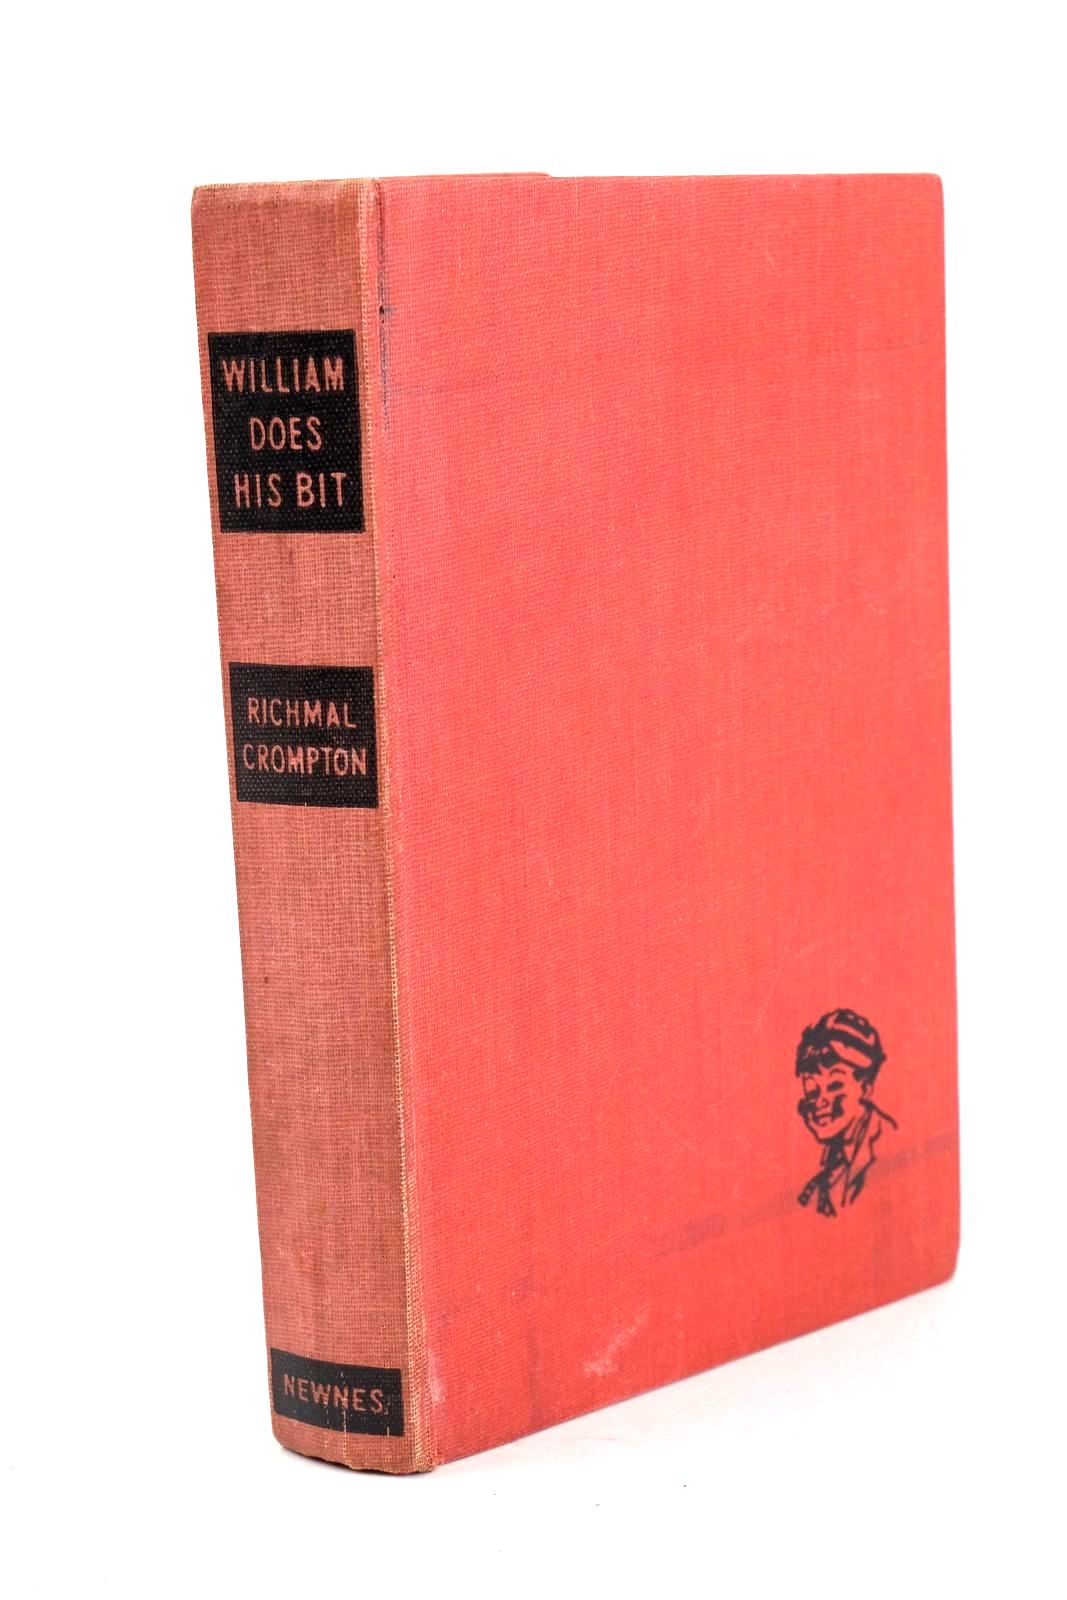 Photo of WILLIAM DOES HIS BIT written by Crompton, Richmal illustrated by Henry, Thomas published by George Newnes Limited (STOCK CODE: 1326161)  for sale by Stella & Rose's Books